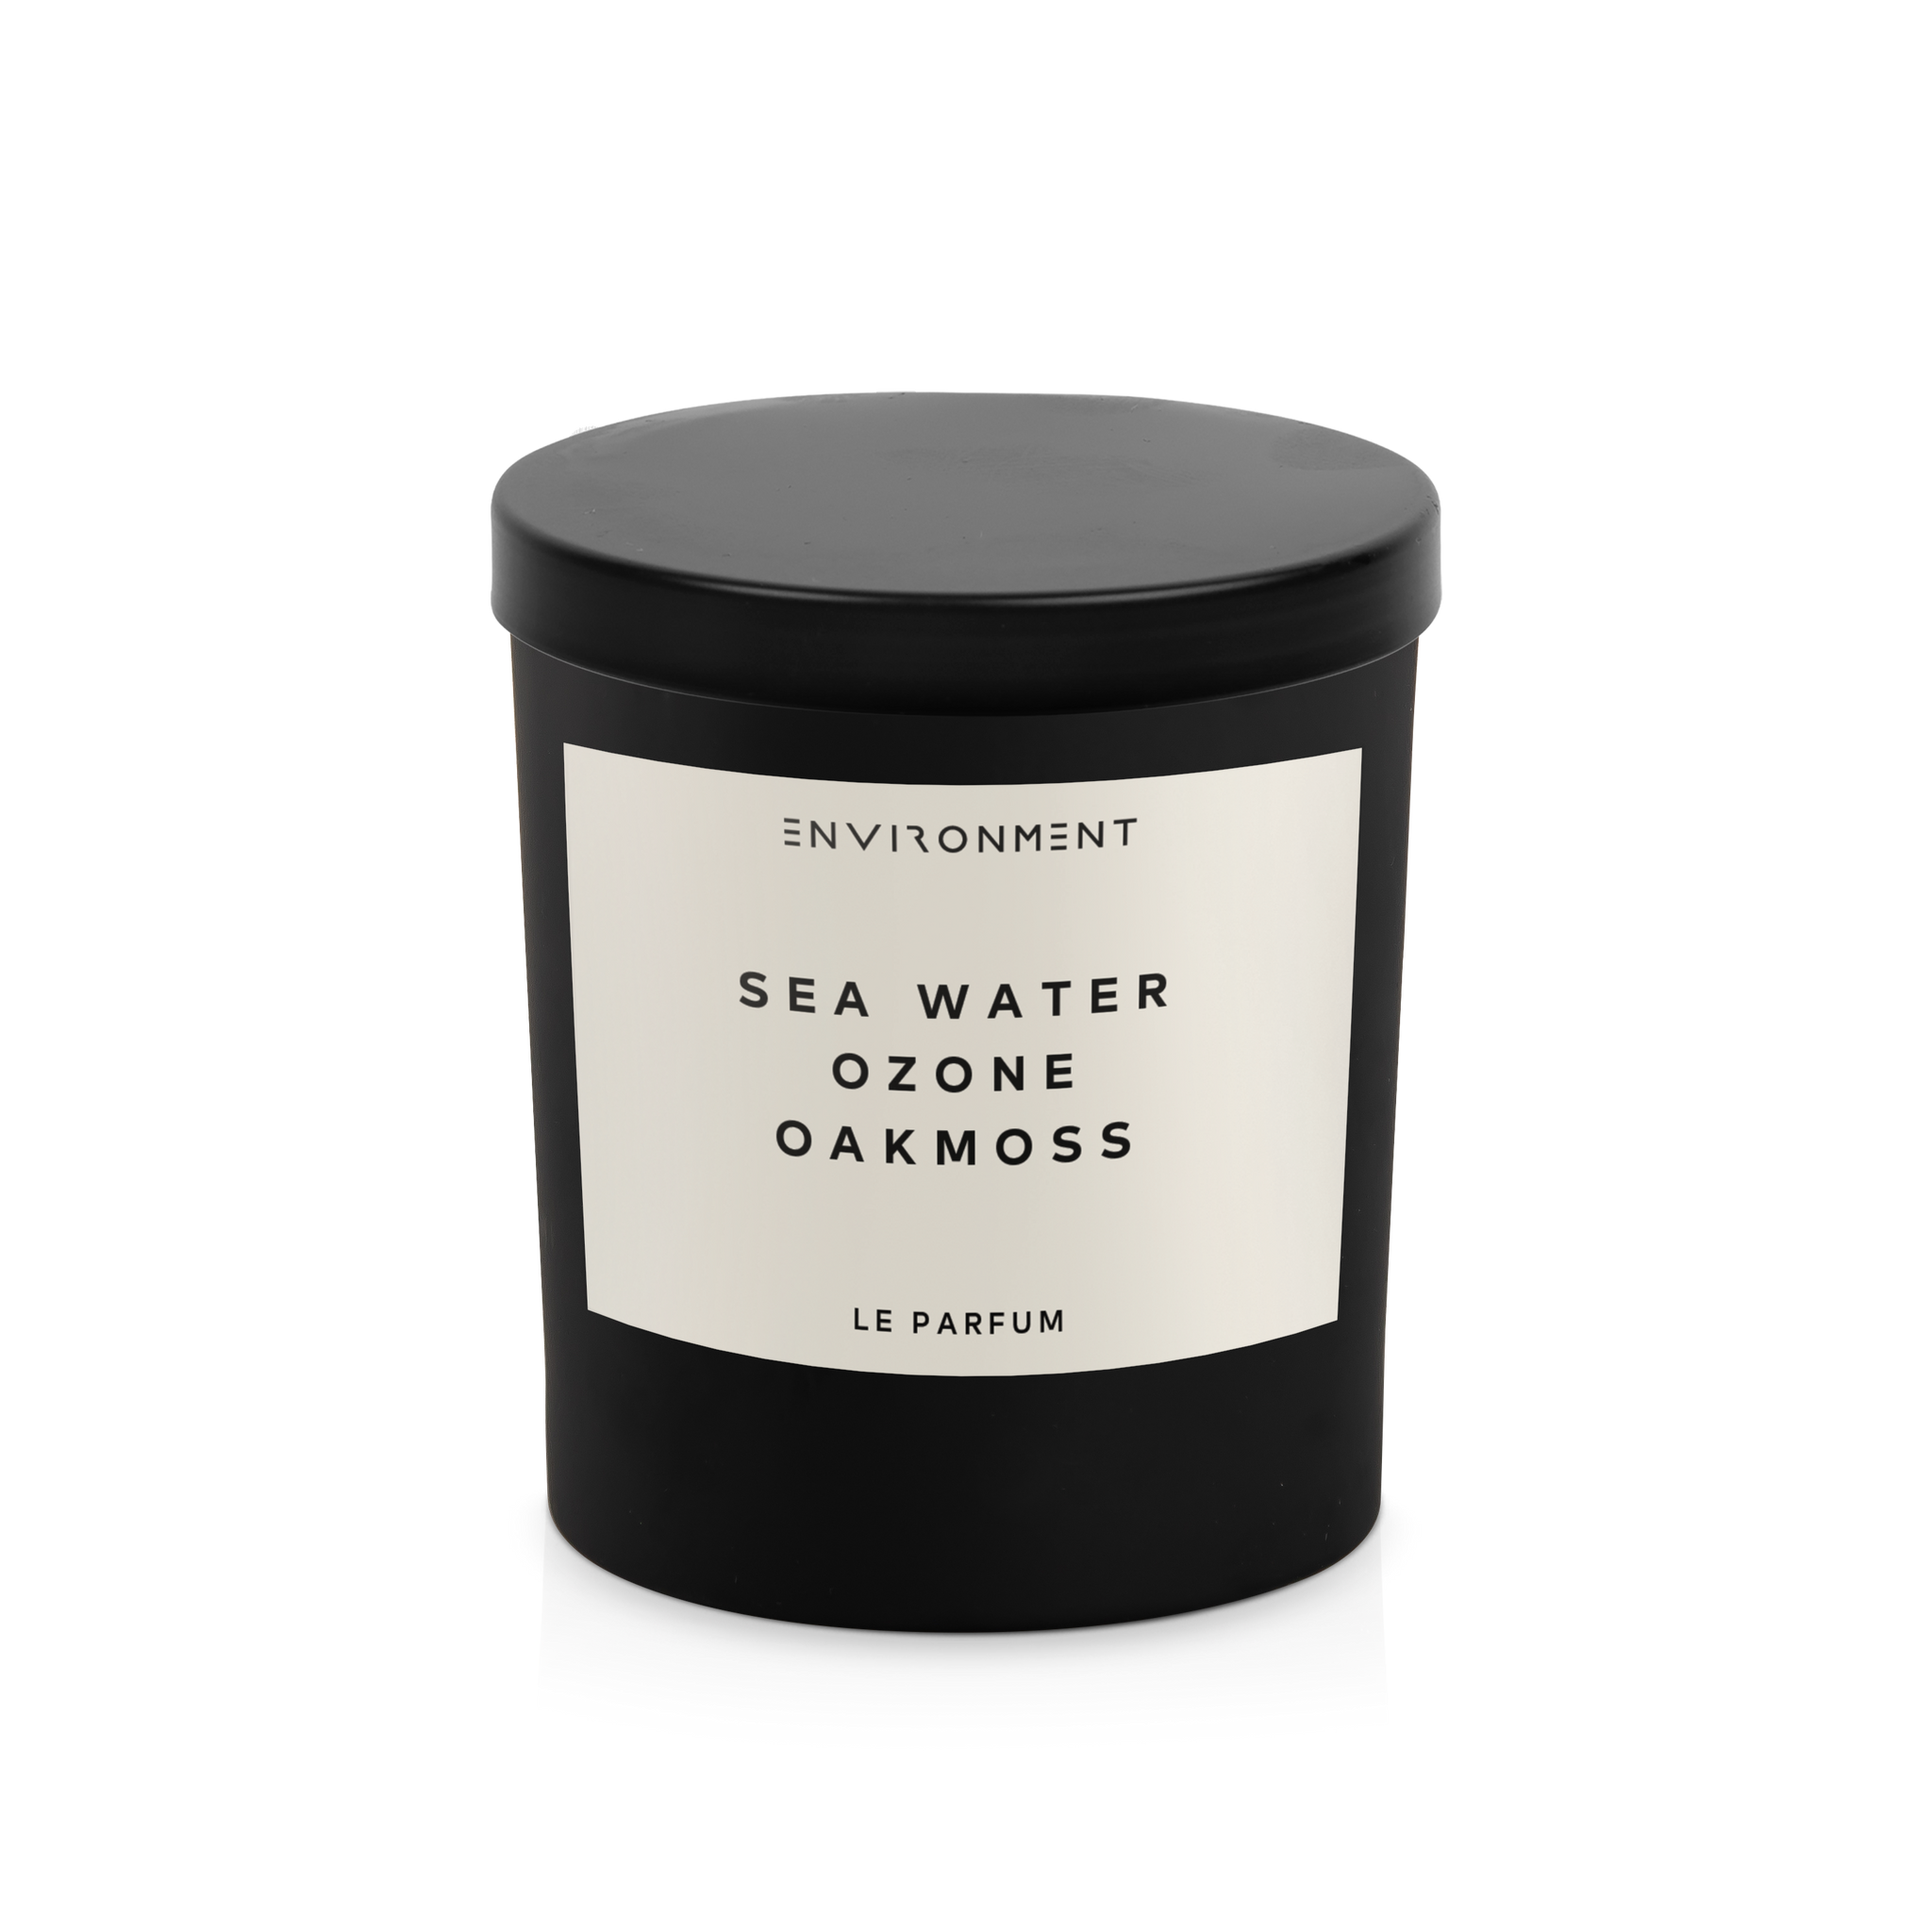 Sea Water | Ozone | Oakmoss 200ml Diffuser and 8oz Candle Gift Pack (Inspired by Davidoff Cool Water®)